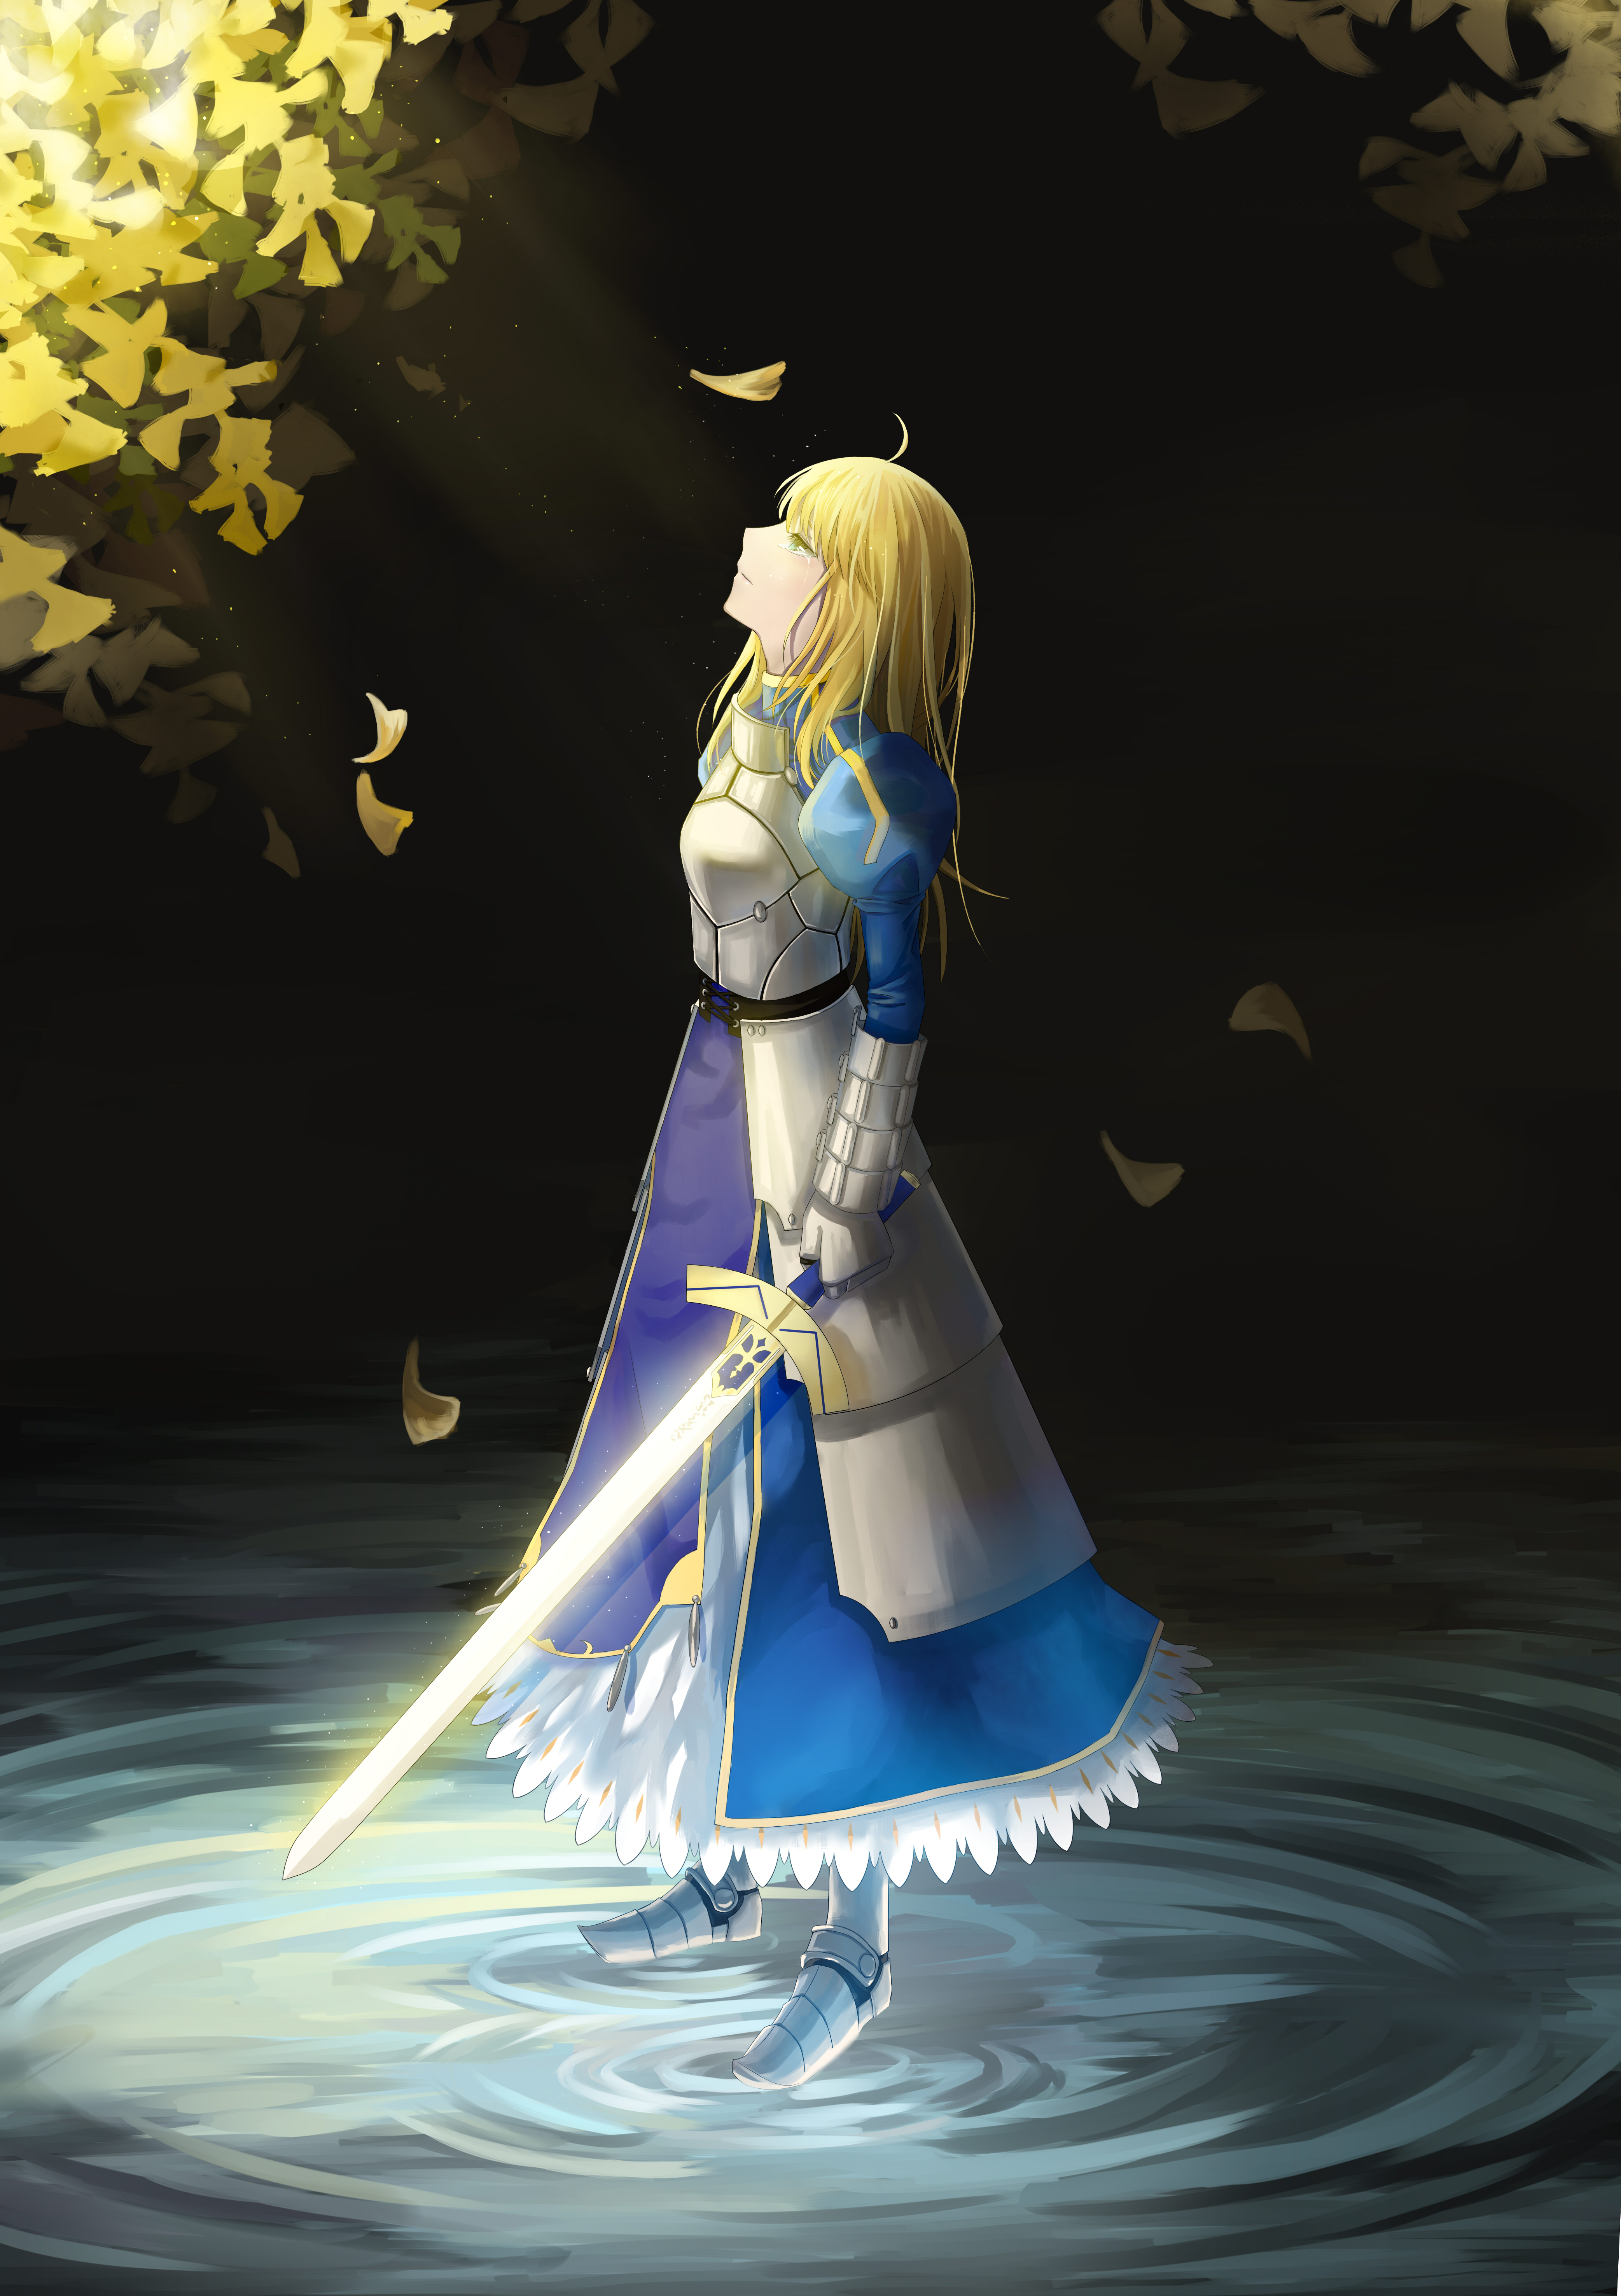 Fate Series FGO Fate Stay Night Fate Zero Anime Girls 2D Female Warrior Long Hair Women With Swords  4169x5905